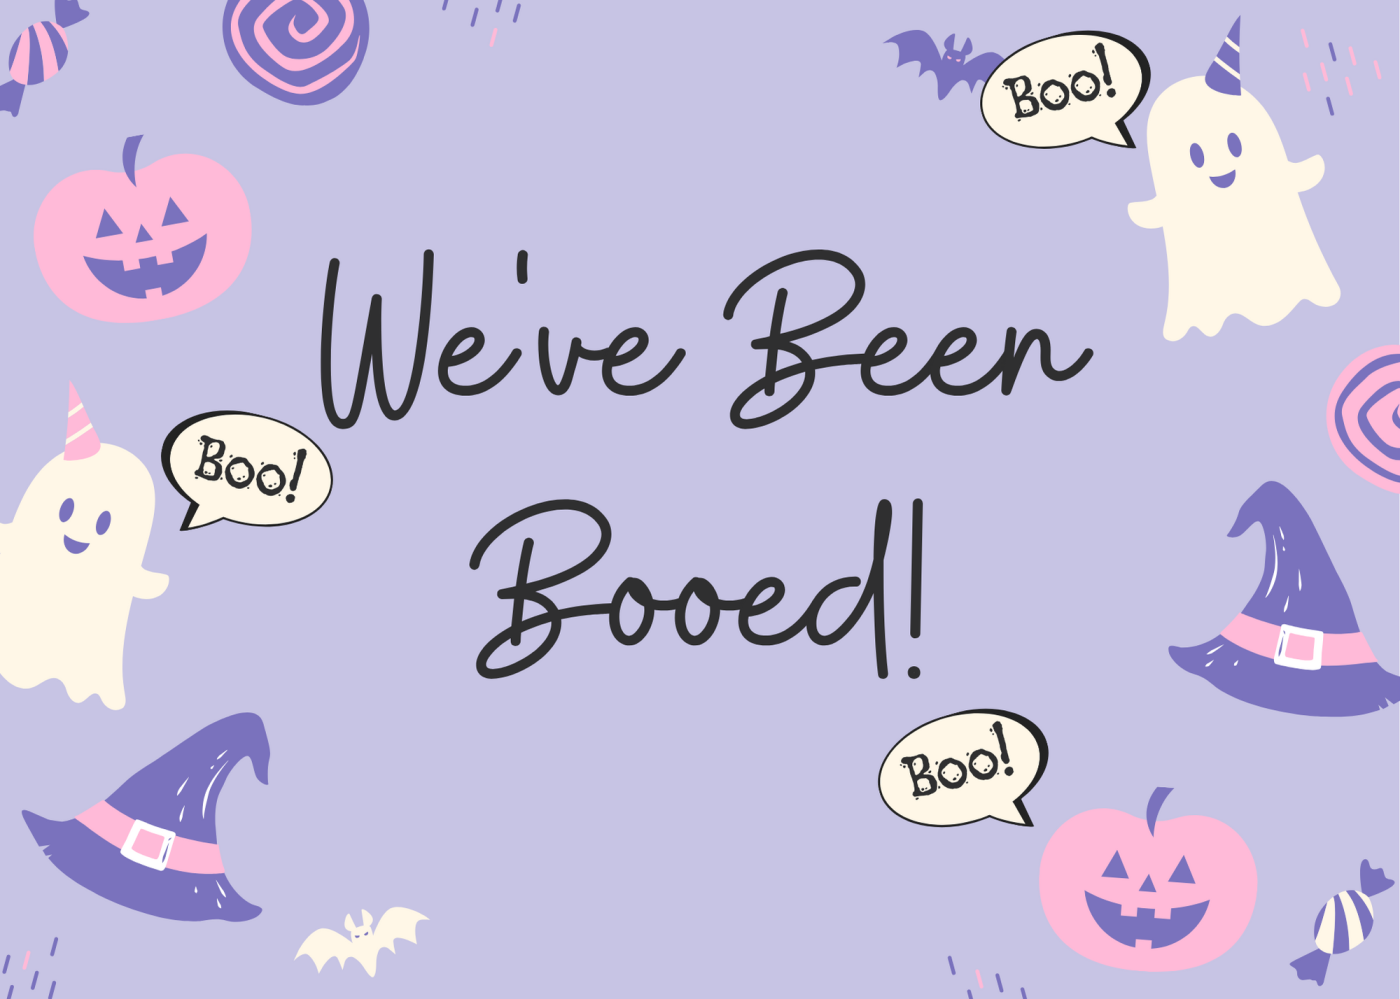 "You've Been Boo-ed!" {Free Printable}